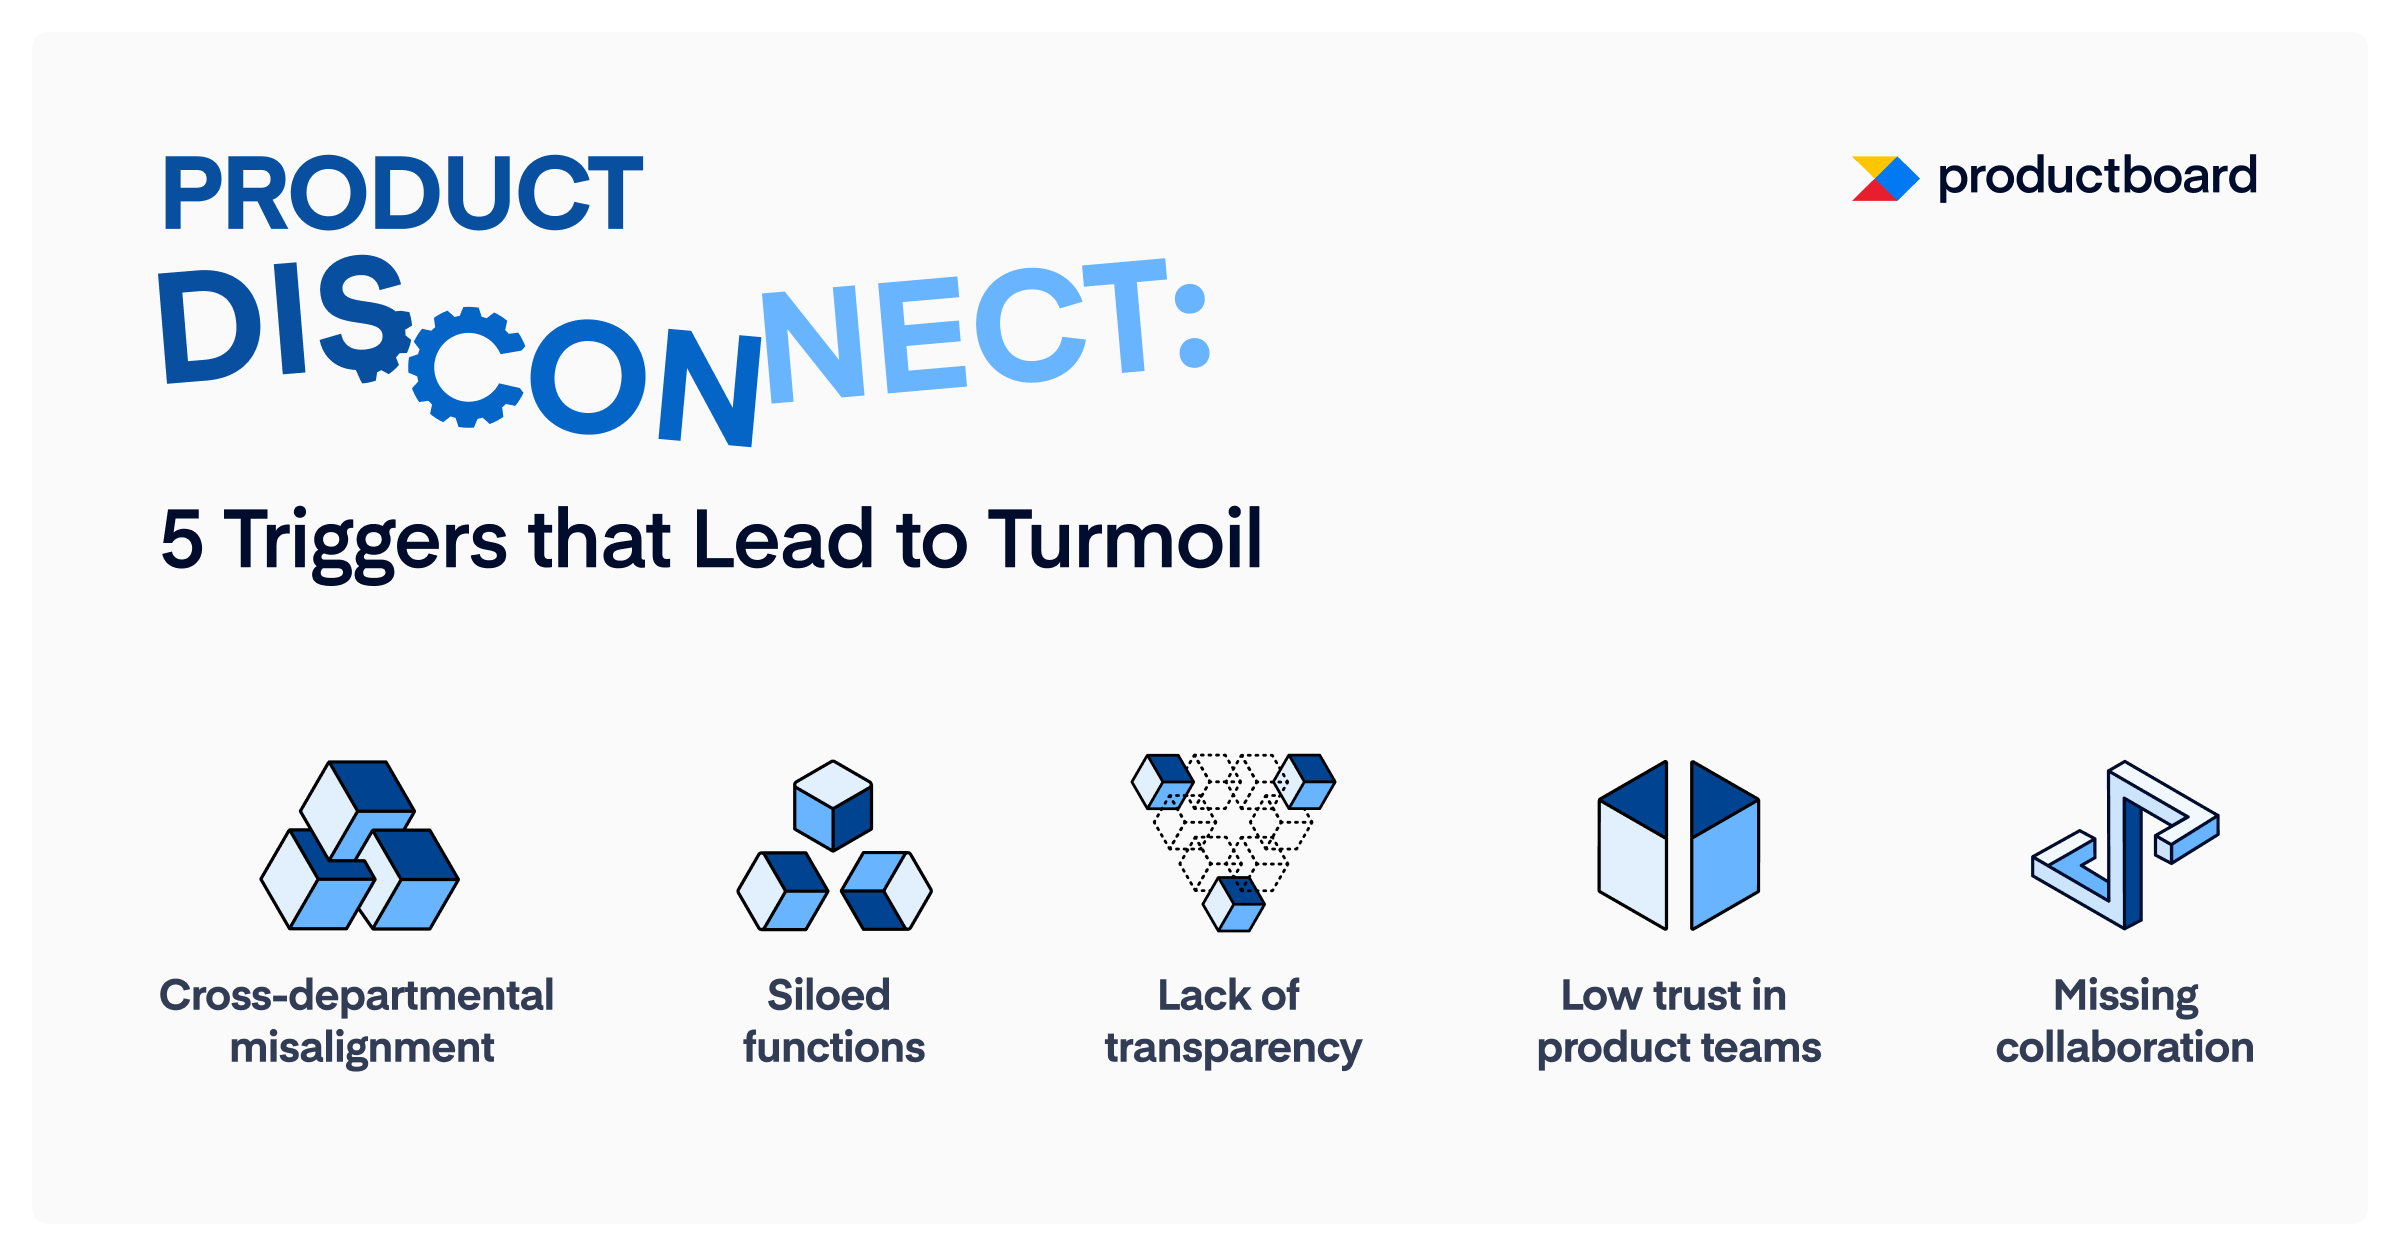 [Infographic] Product disconnect: 5 triggers that lead to turmoil